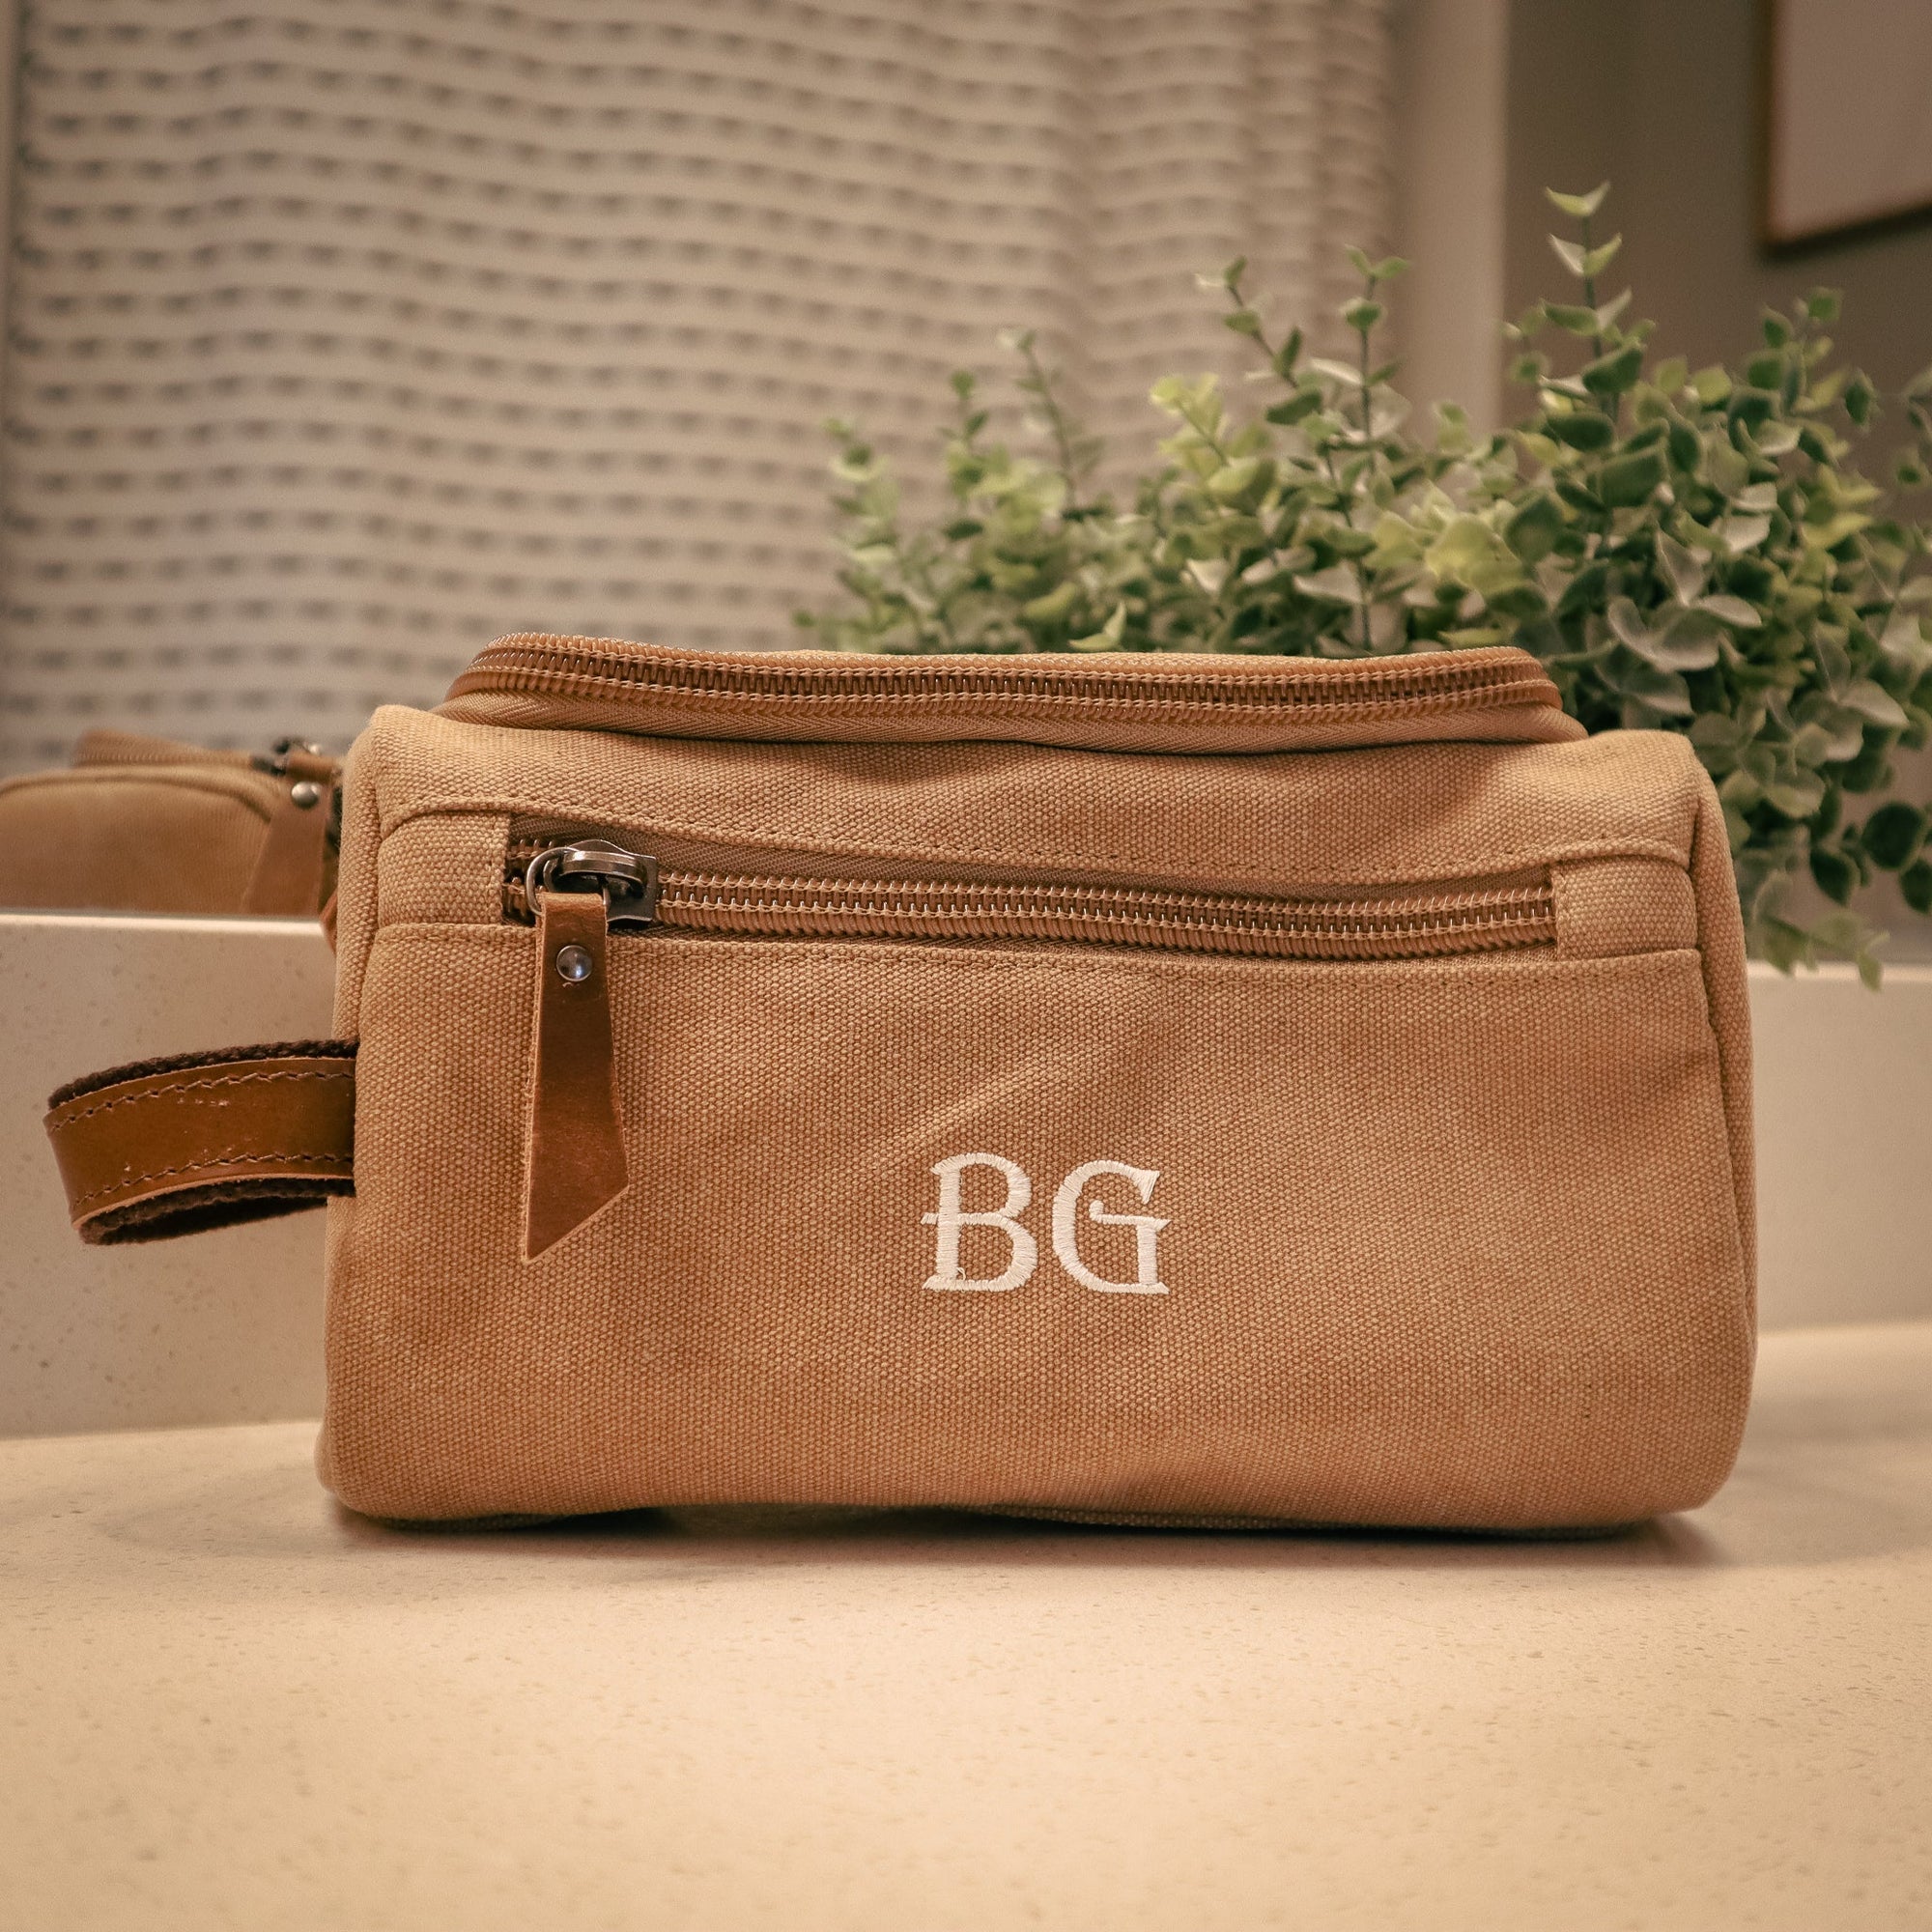 15 Best Personalized Duffle Bags for Men - GroomsDay